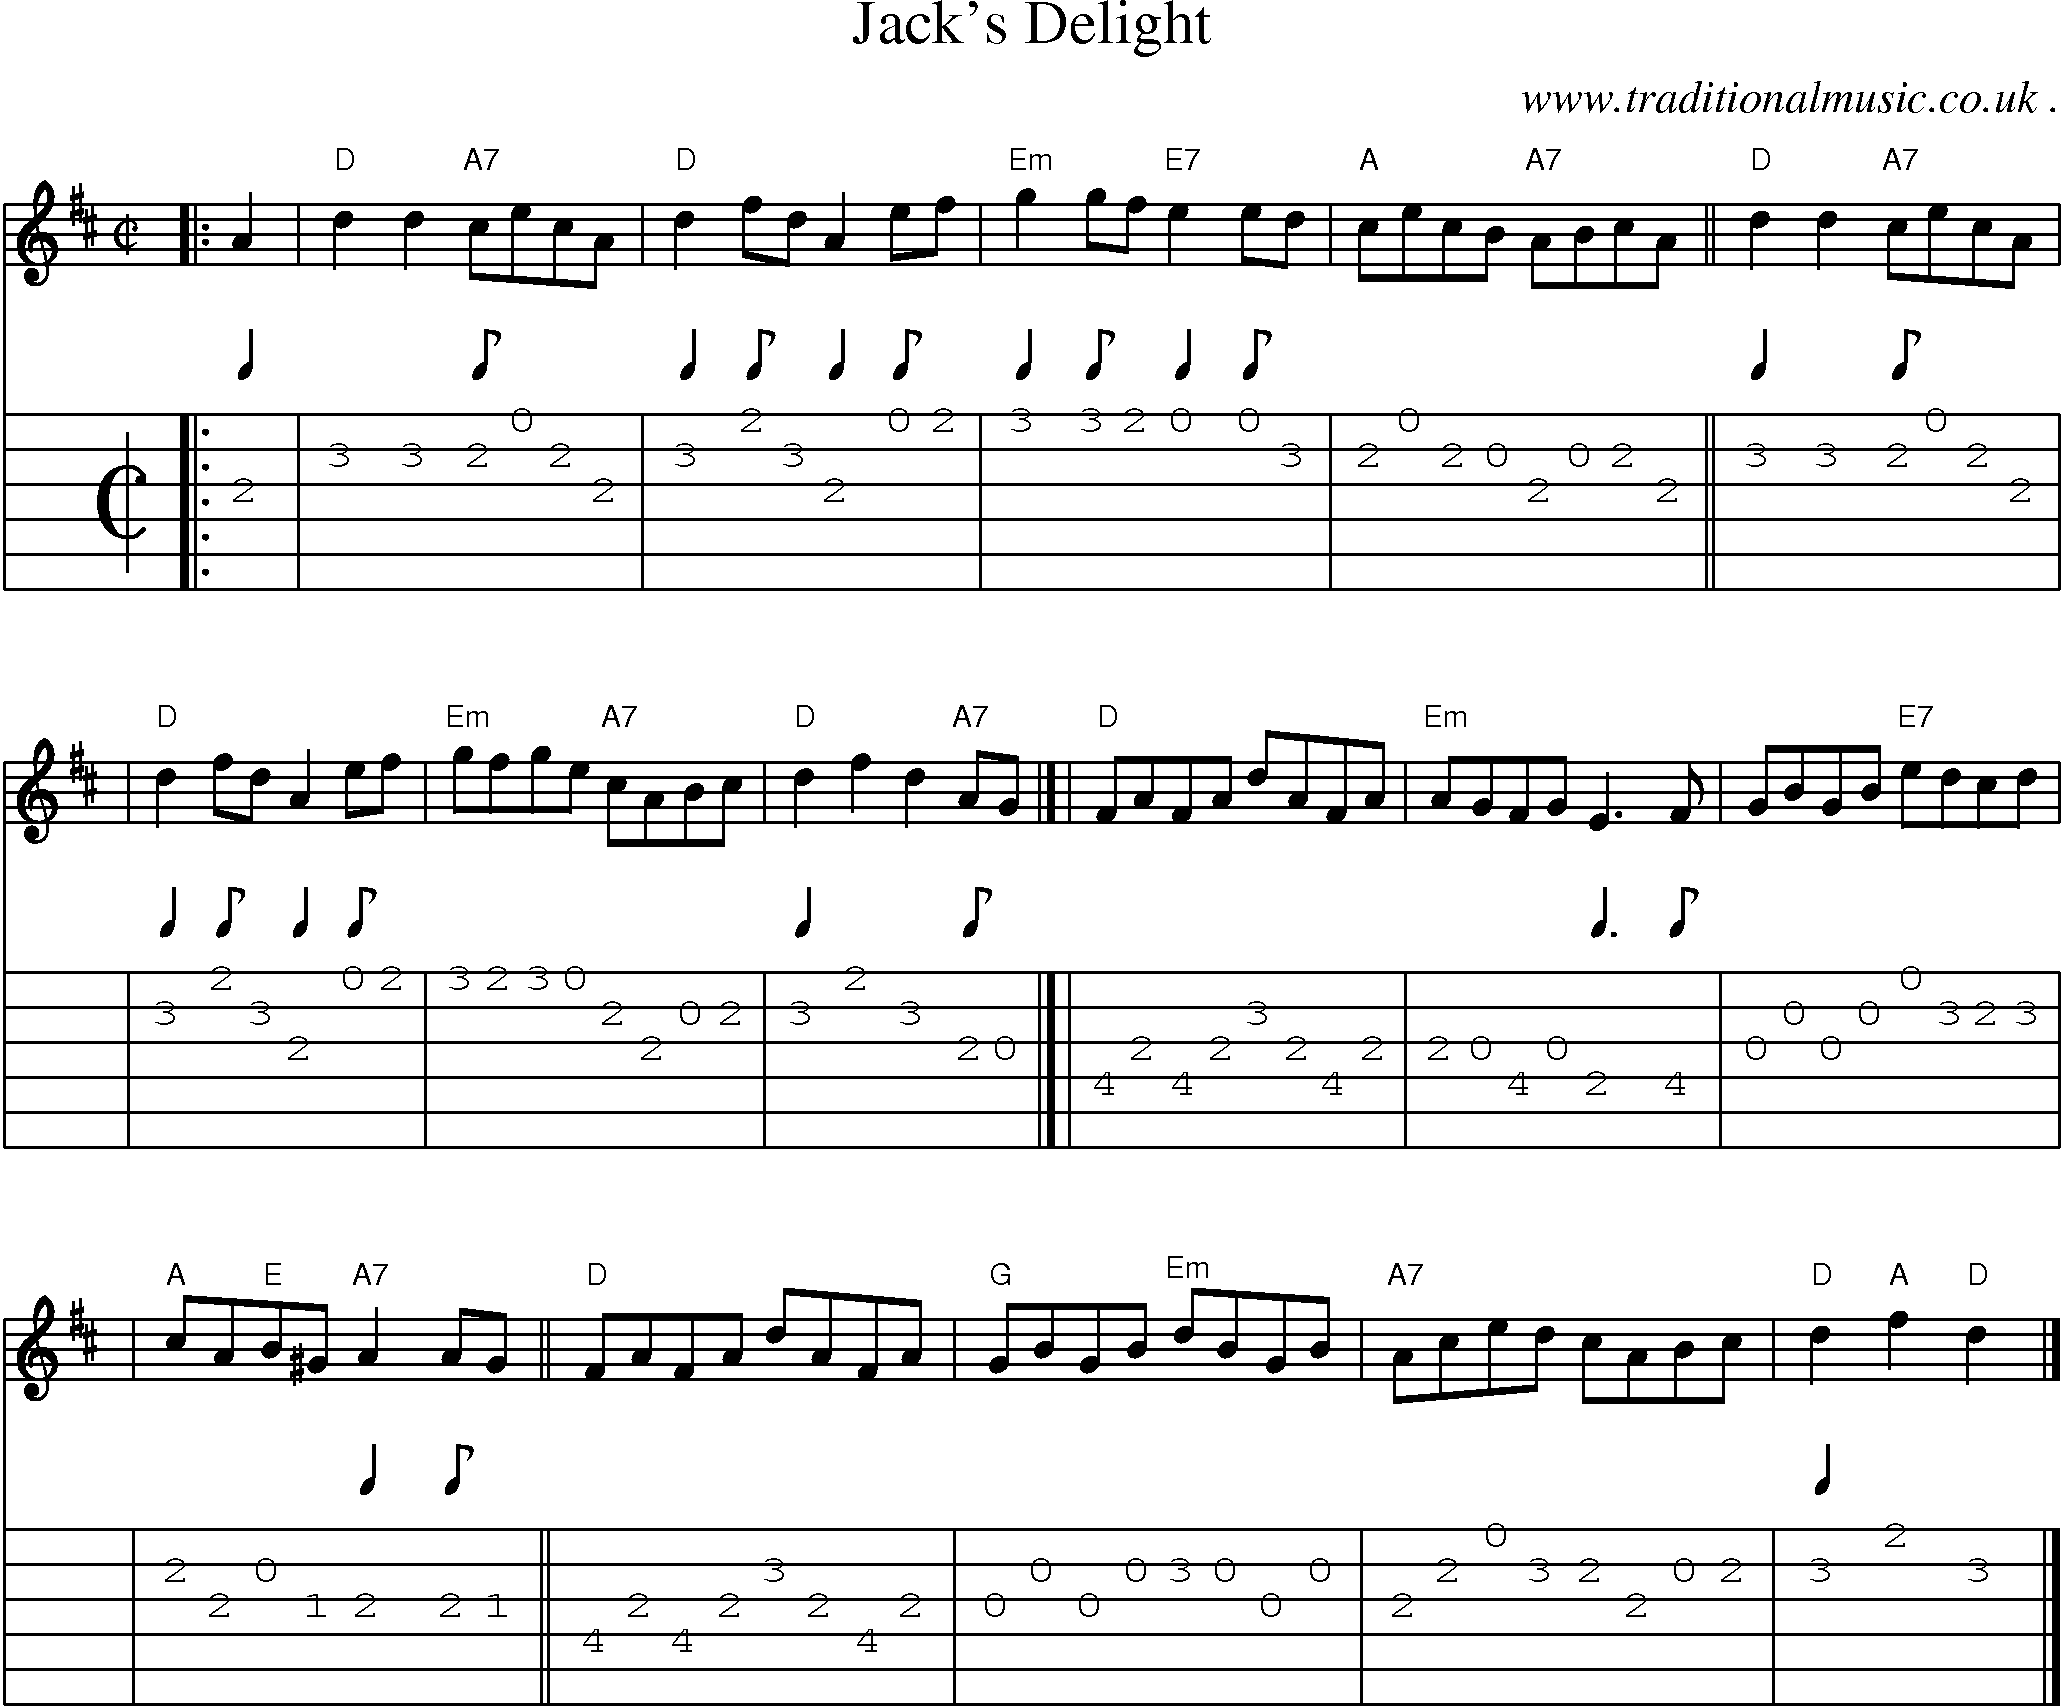 Sheet-music  score, Chords and Guitar Tabs for Jacks Delight